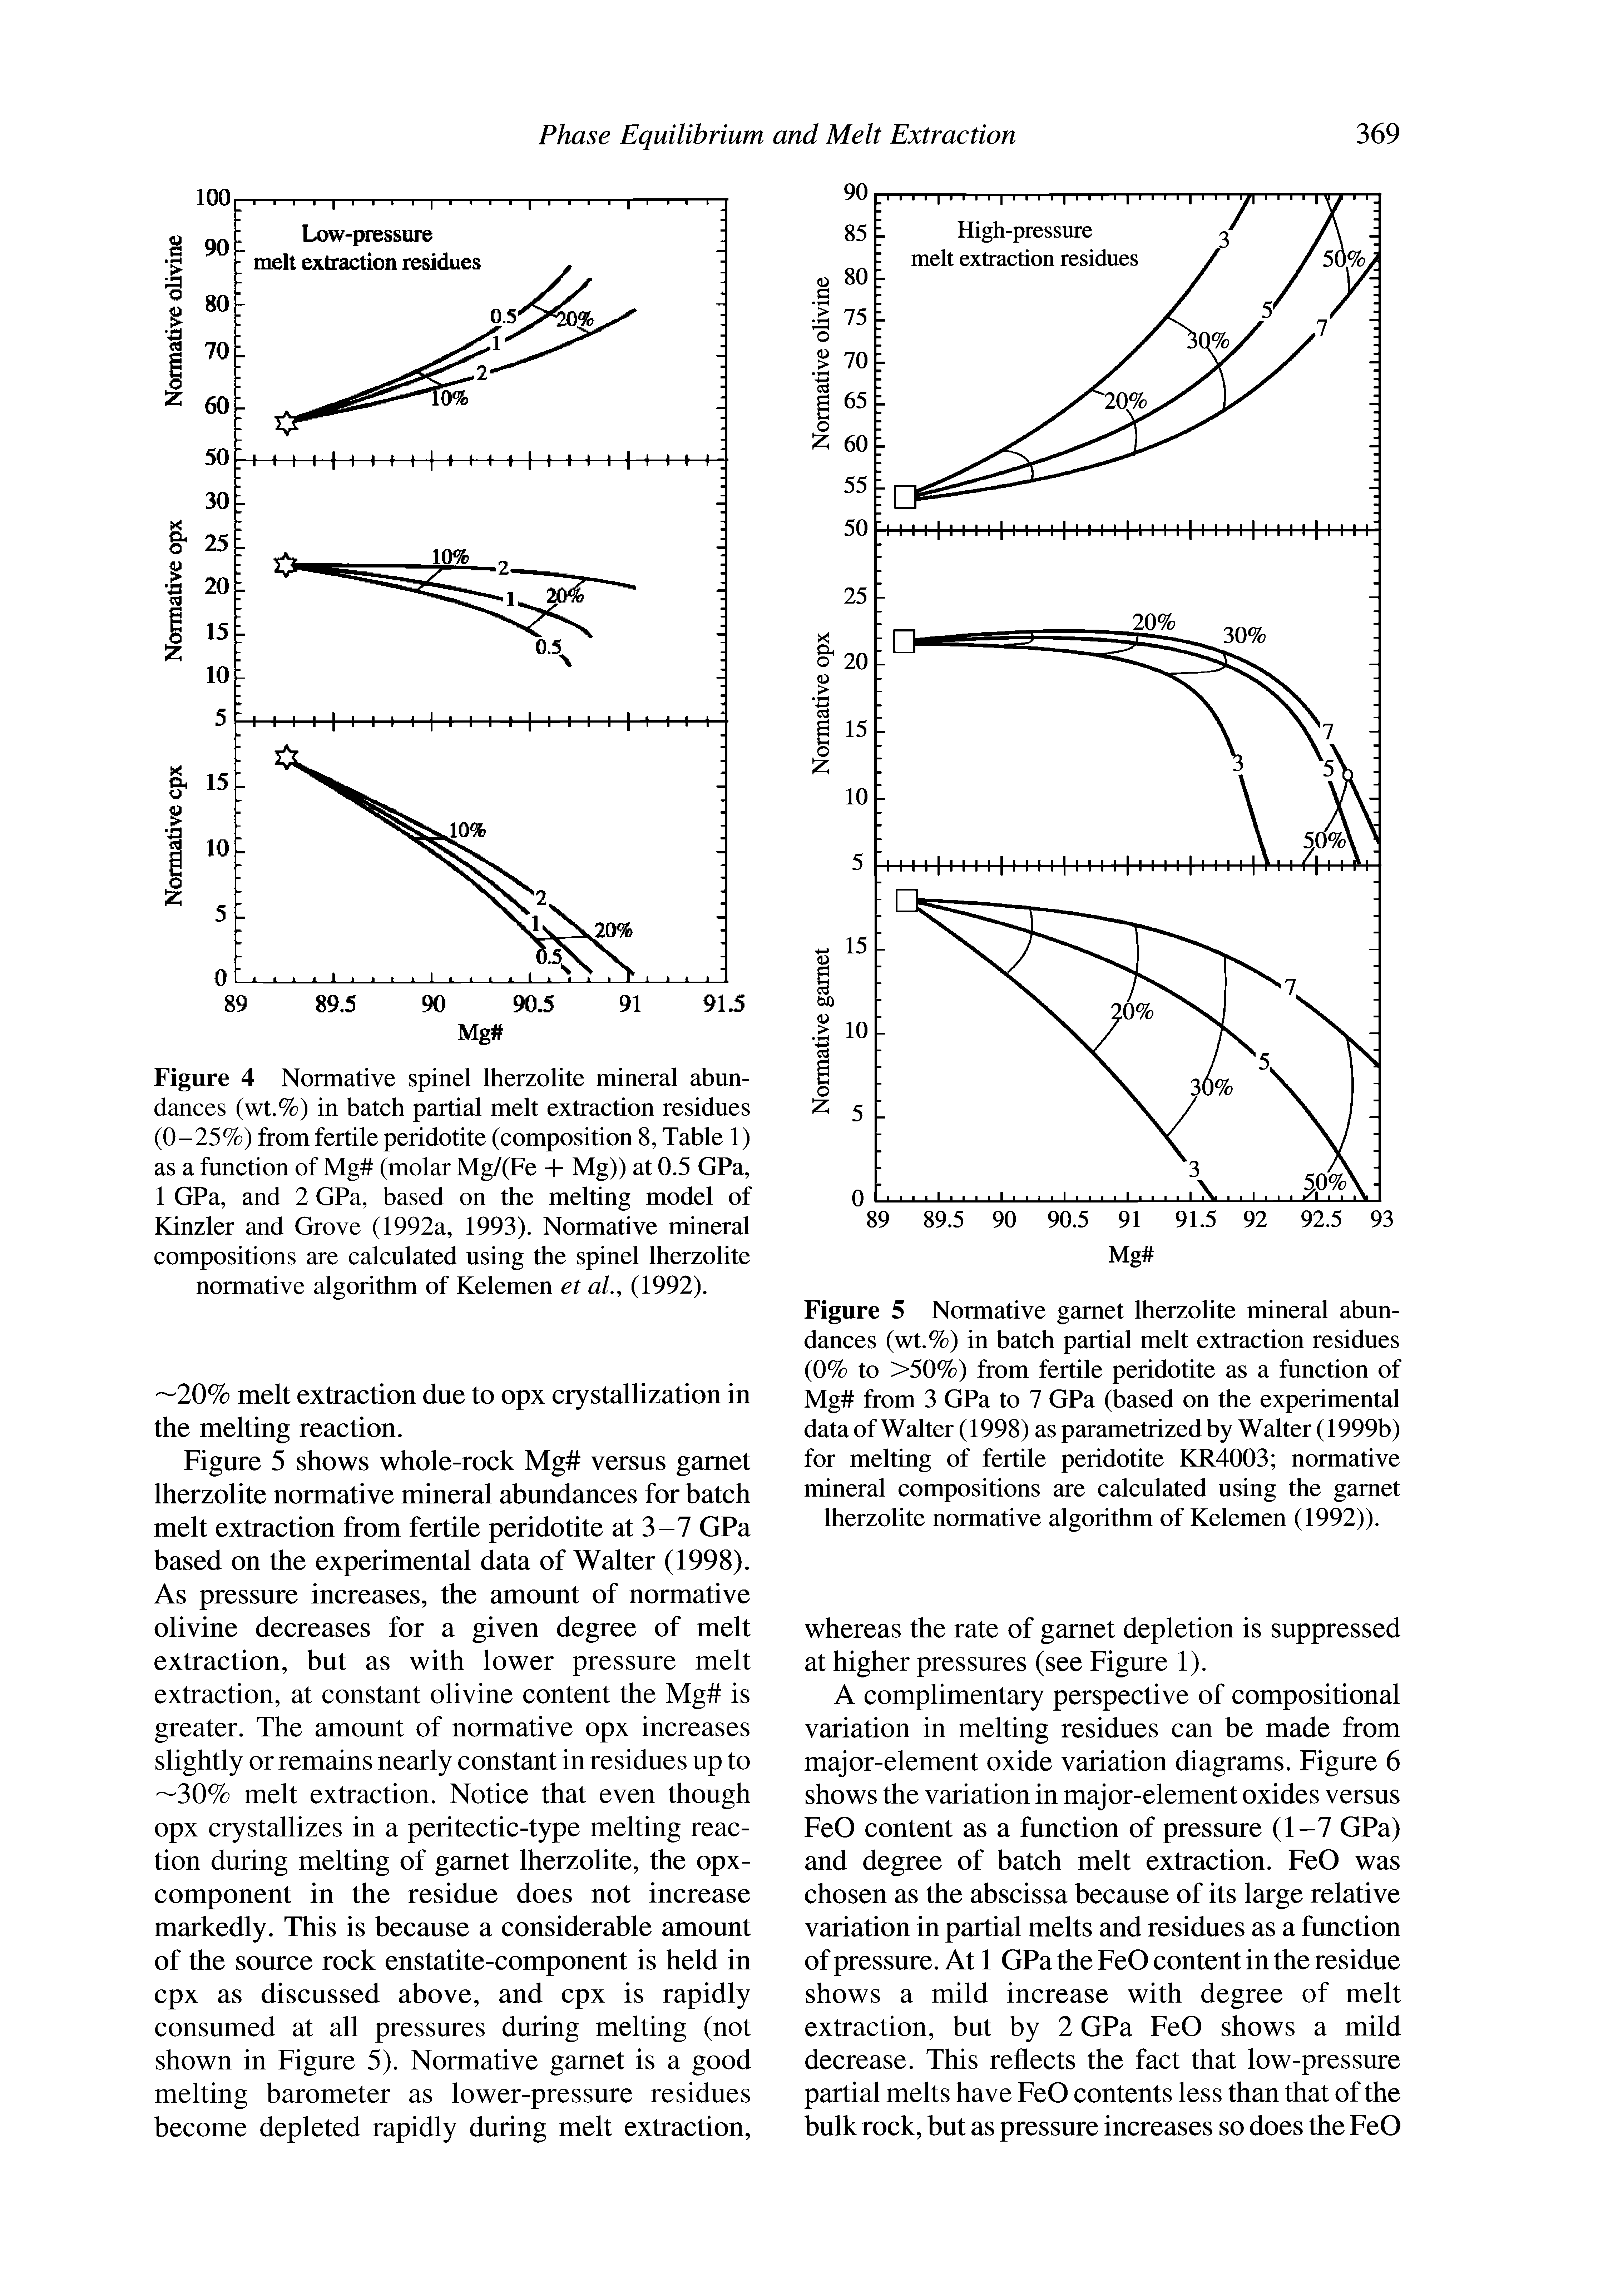 Figure 4 Normative spinel Iherzolite mineral abundances (wt.%) in batch partial melt extraction residues (0-25%) from fertile peridotite (composition 8, Table 1) as a function of Mg (molar Mg/(Fe + Mg)) at 0.5 GPa, 1 GPa, and 2 GPa, based on the melting model of Kinzler and Grove (1992a, 1993). Normative mineral compositions are calculated using the spinel Iherzolite normative algorithm of Kelemen et ai, (1992).